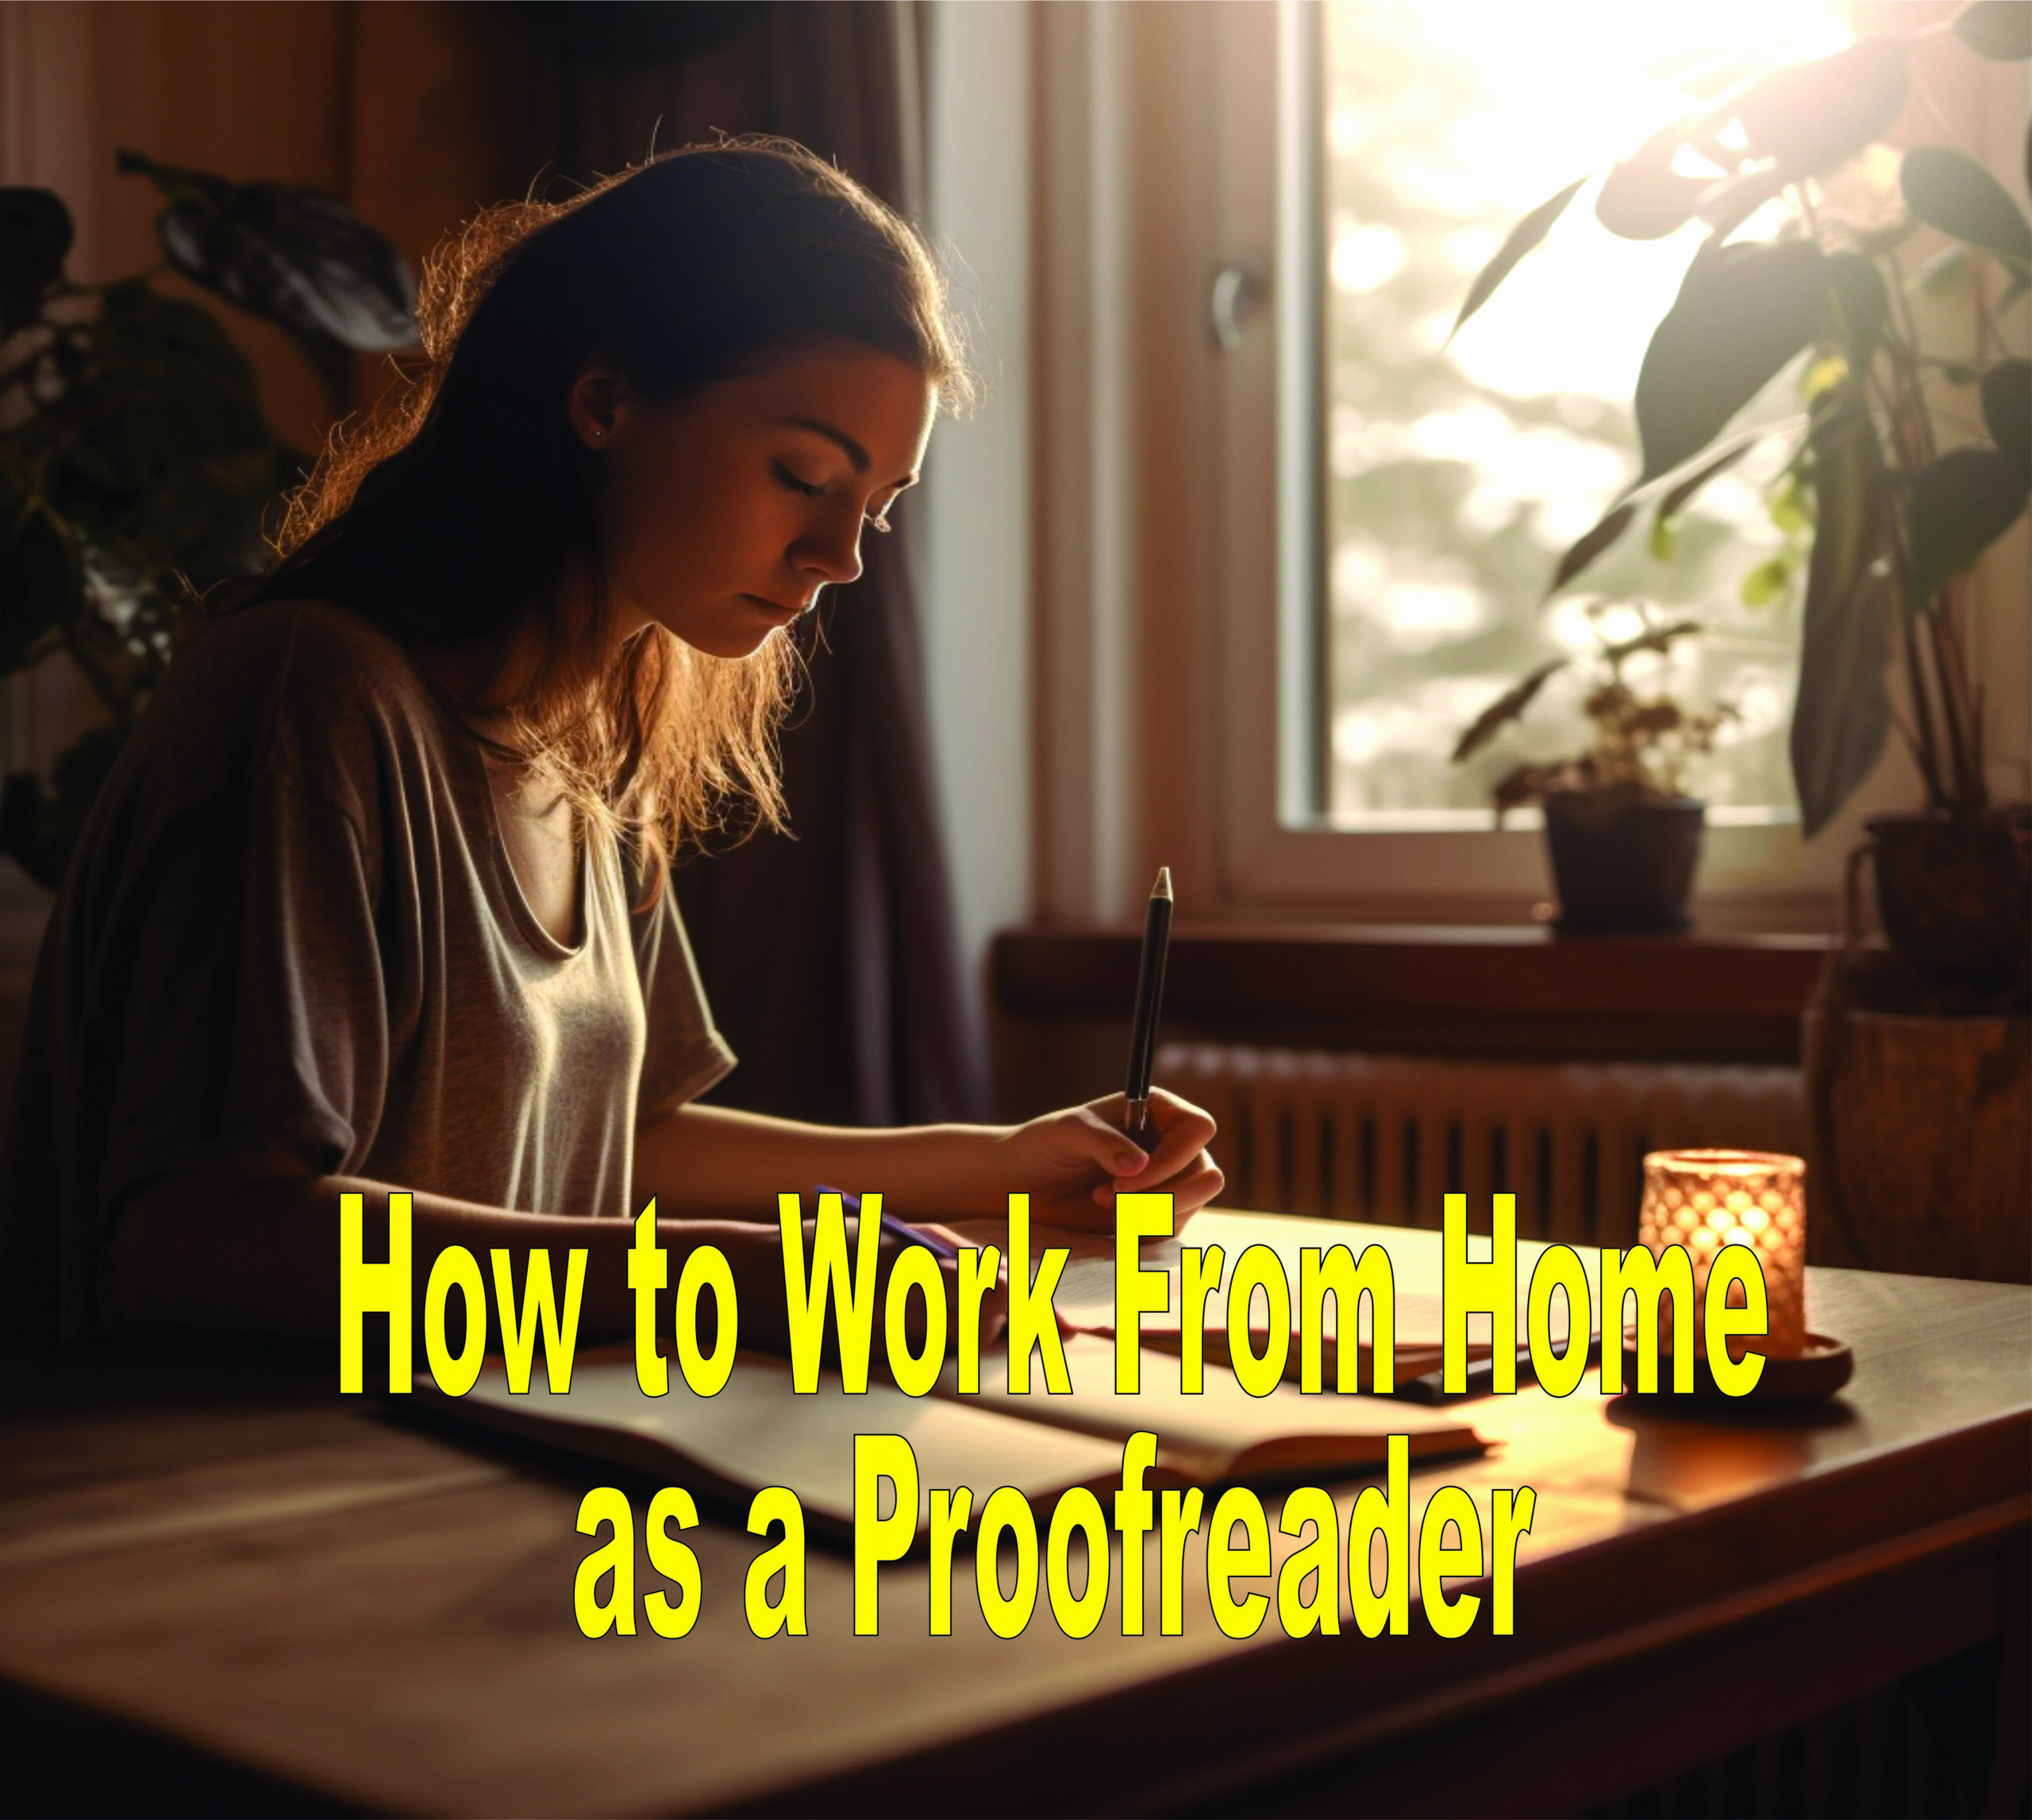 How To Work From Home As A Proofreader